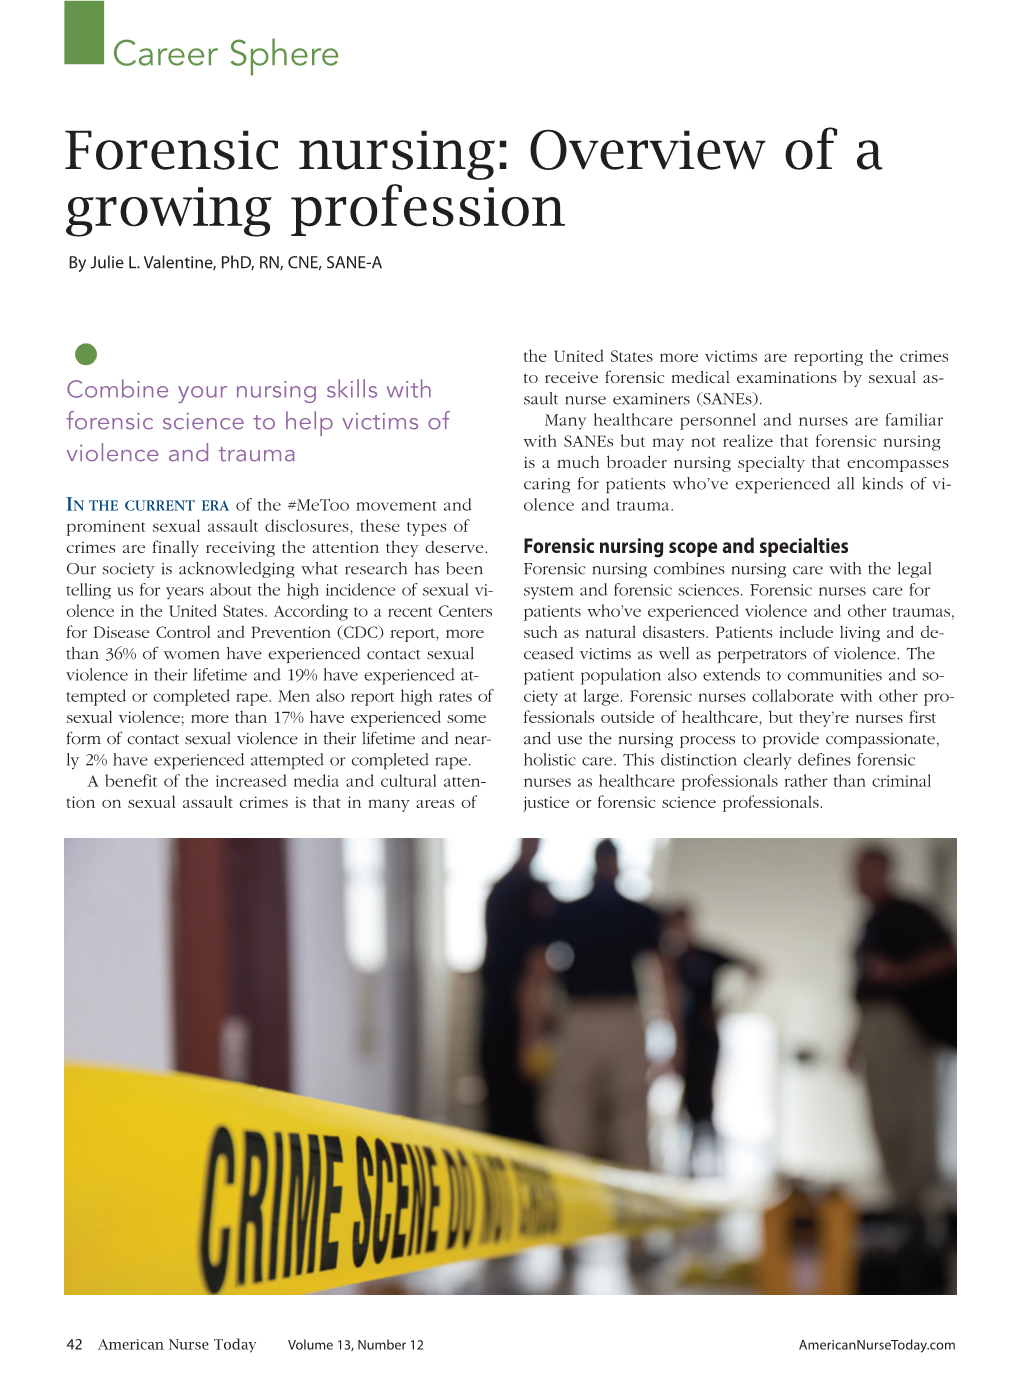 Forensic Nursing: Overview of a Growing Profession by Julie L